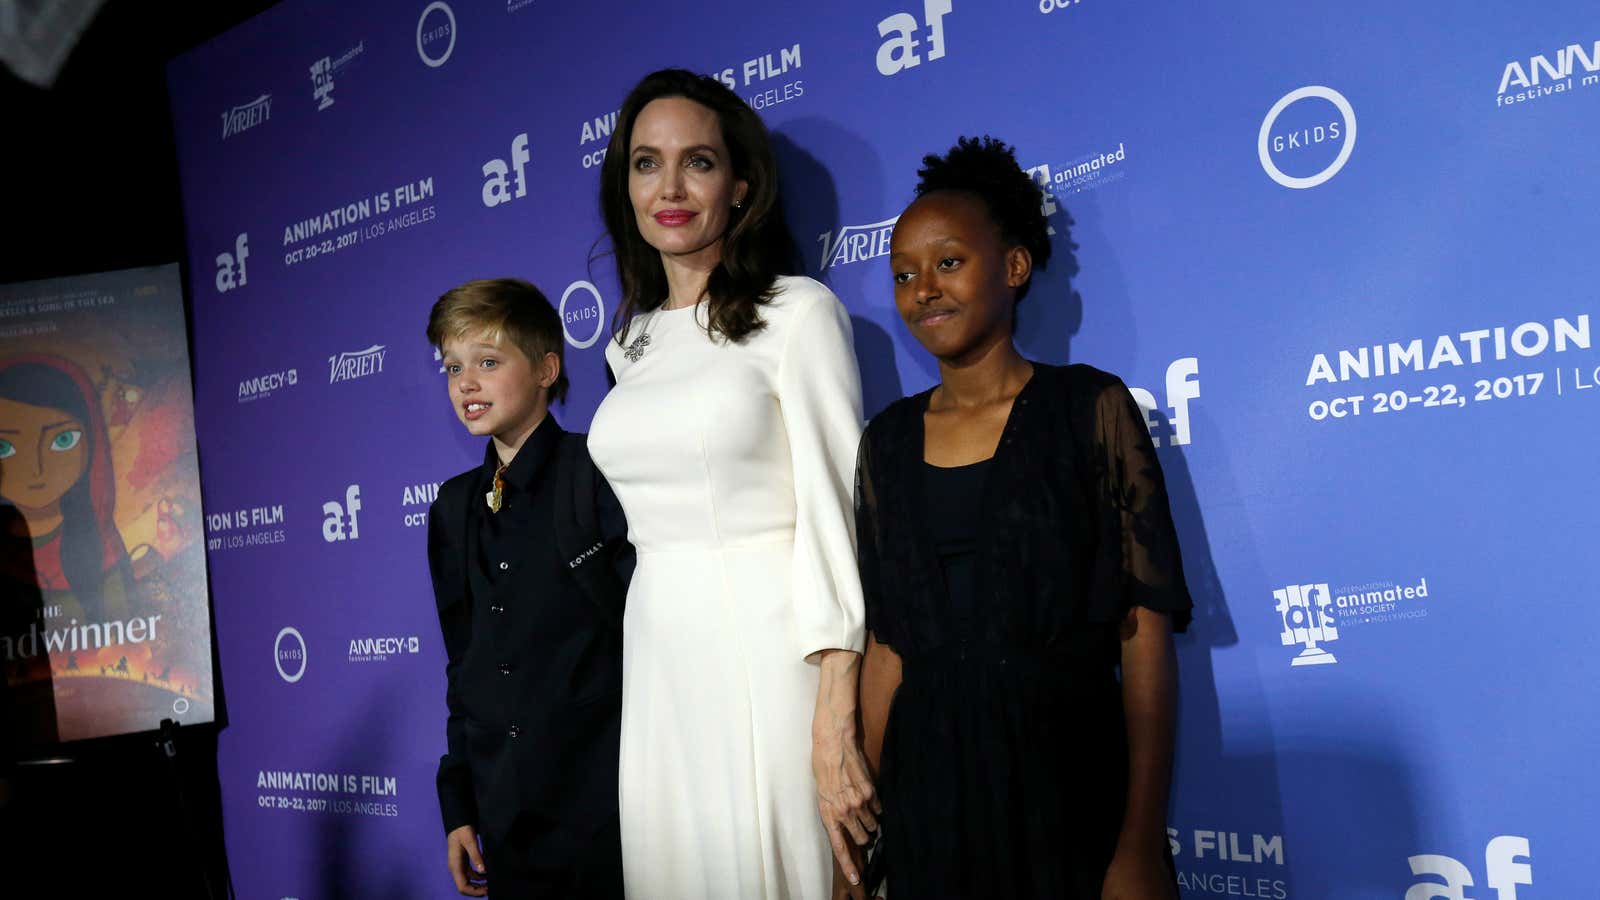 Angelina Jolie adopted daughter Zahara from Ethiopia.